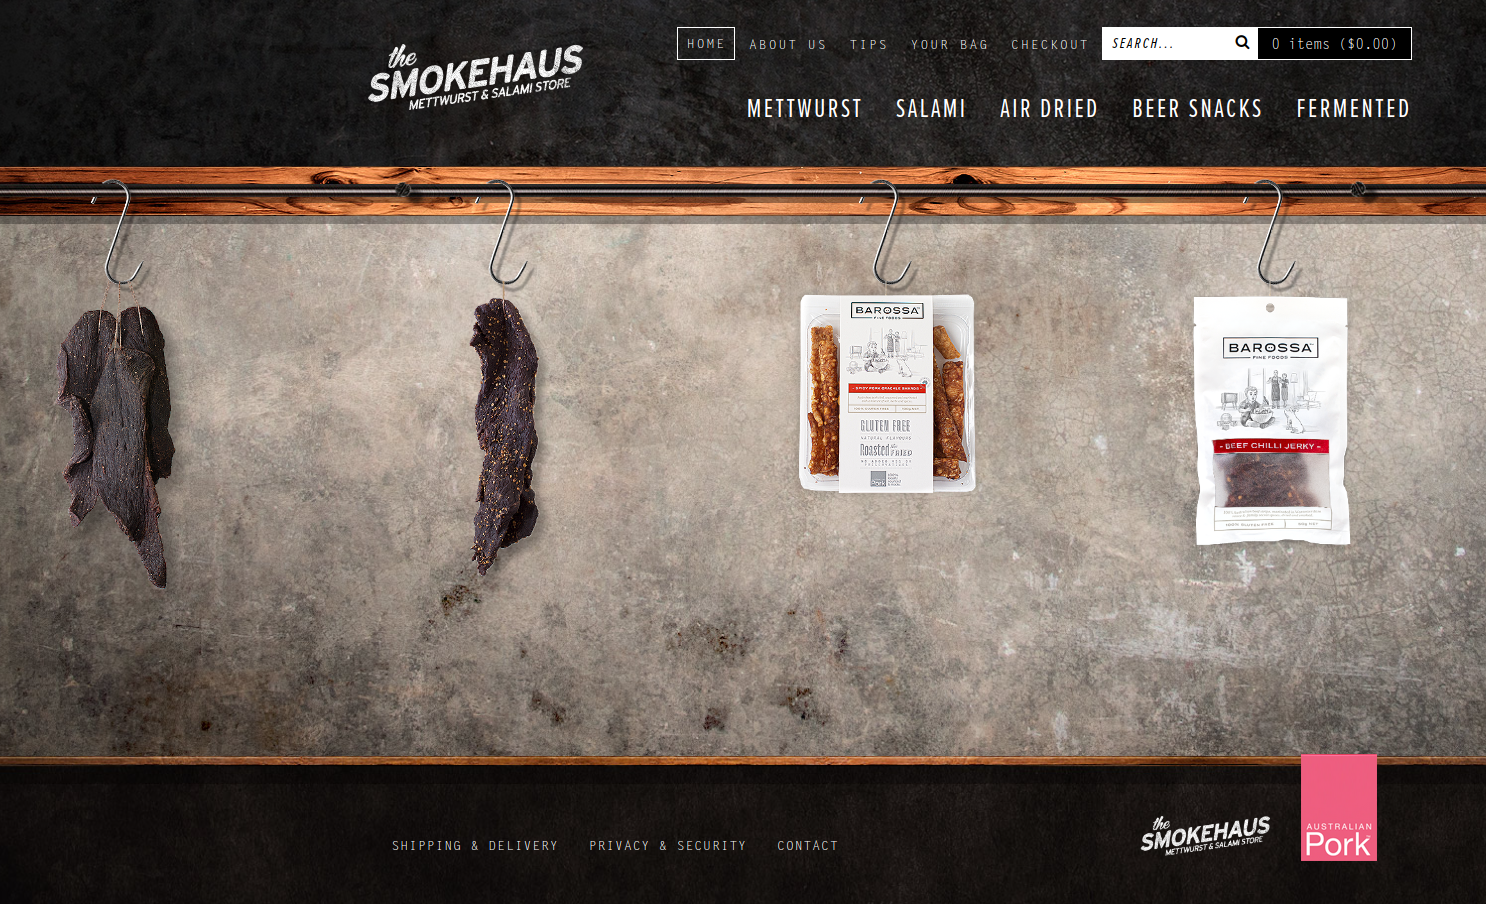 Browsing the products on the ecommerce website of the Smokehaus is like visiting a butcher